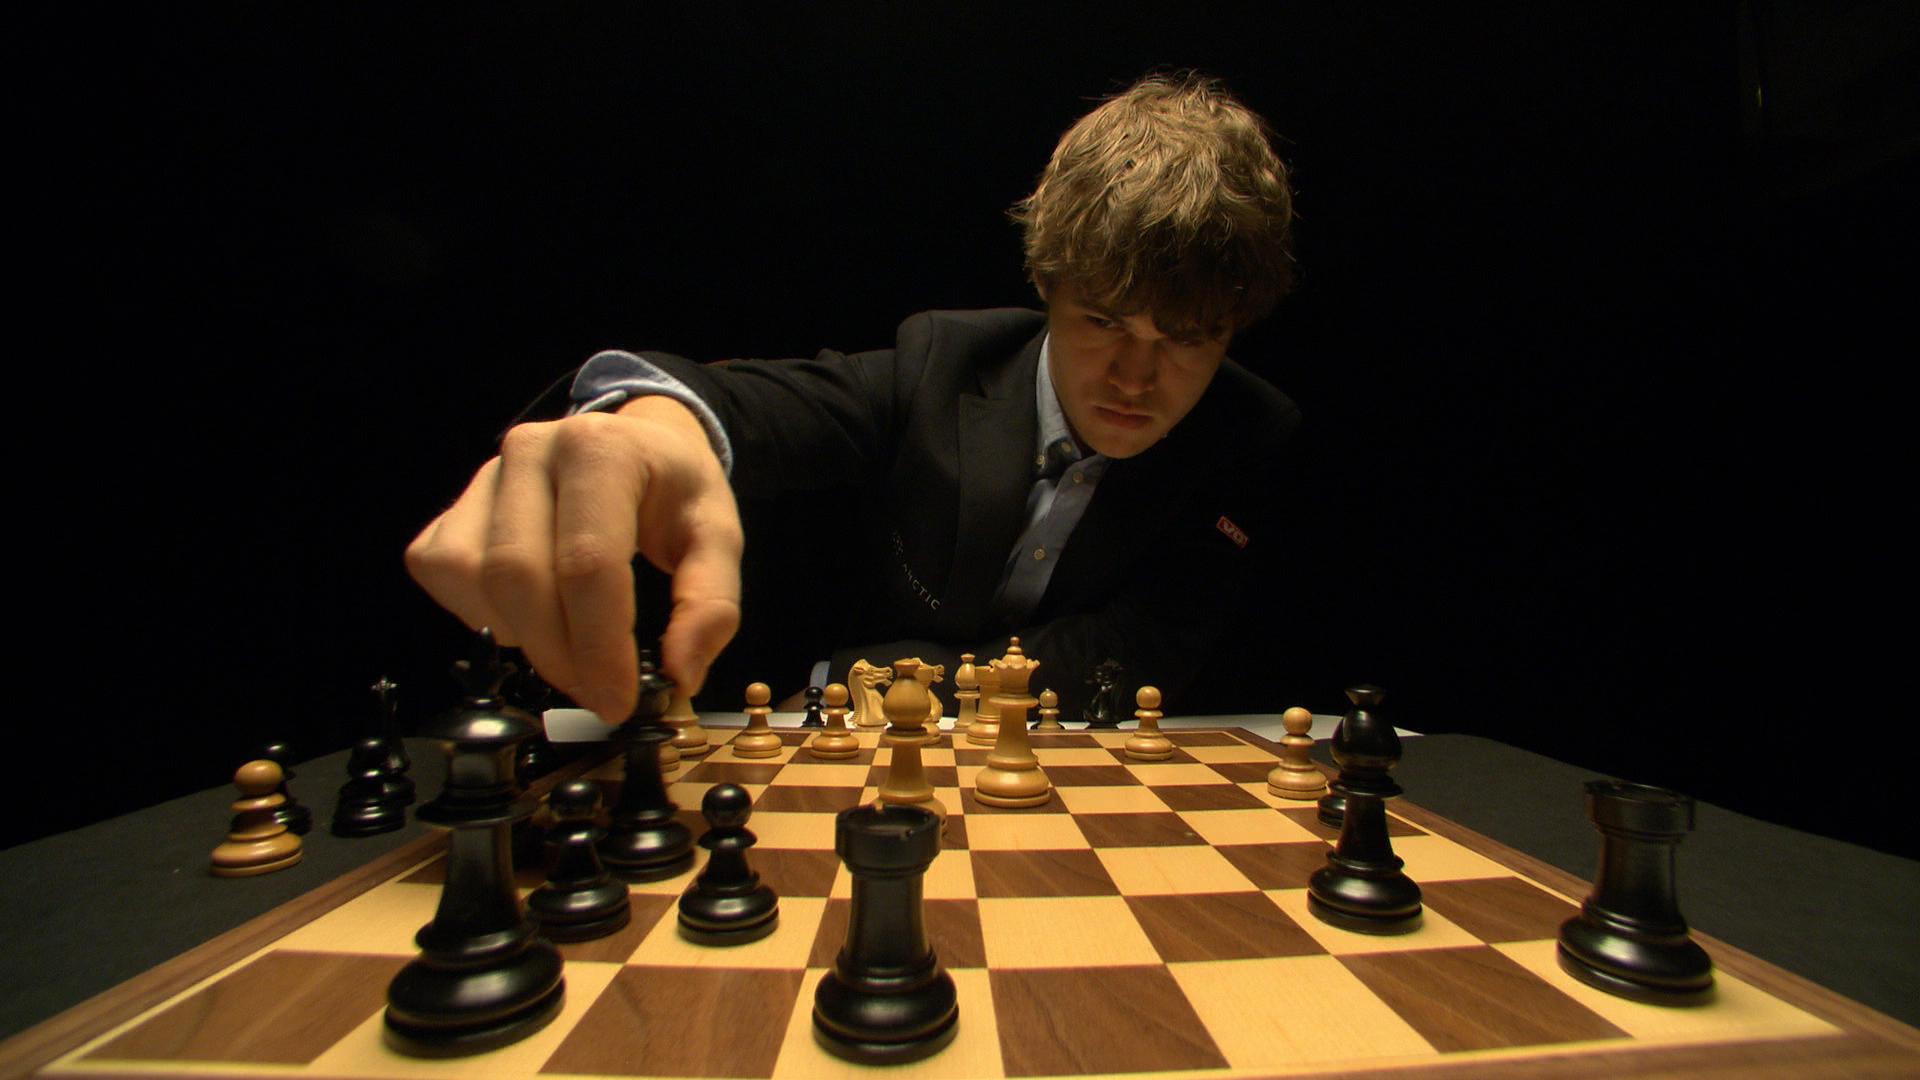 Chess is now a money game and Magnus Carlsen isn't the only one